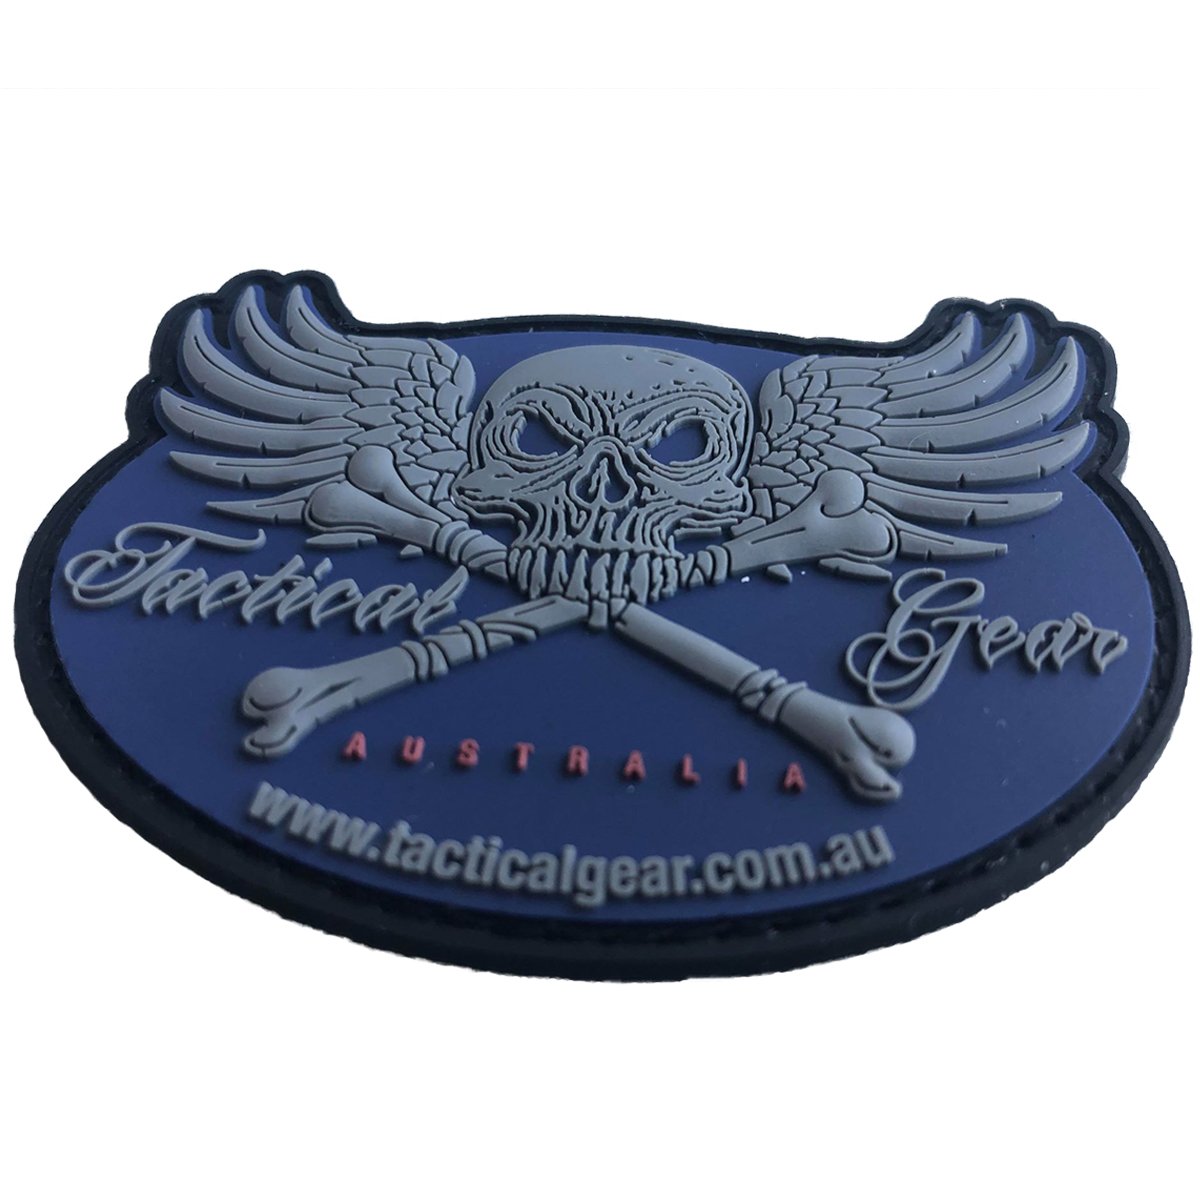 Limited Edition TGA 3D PVC Morale Patch Oval Subdued Coloured Accessories Tactical Gear Australia Tactical Gear Supplier Tactical Distributors Australia